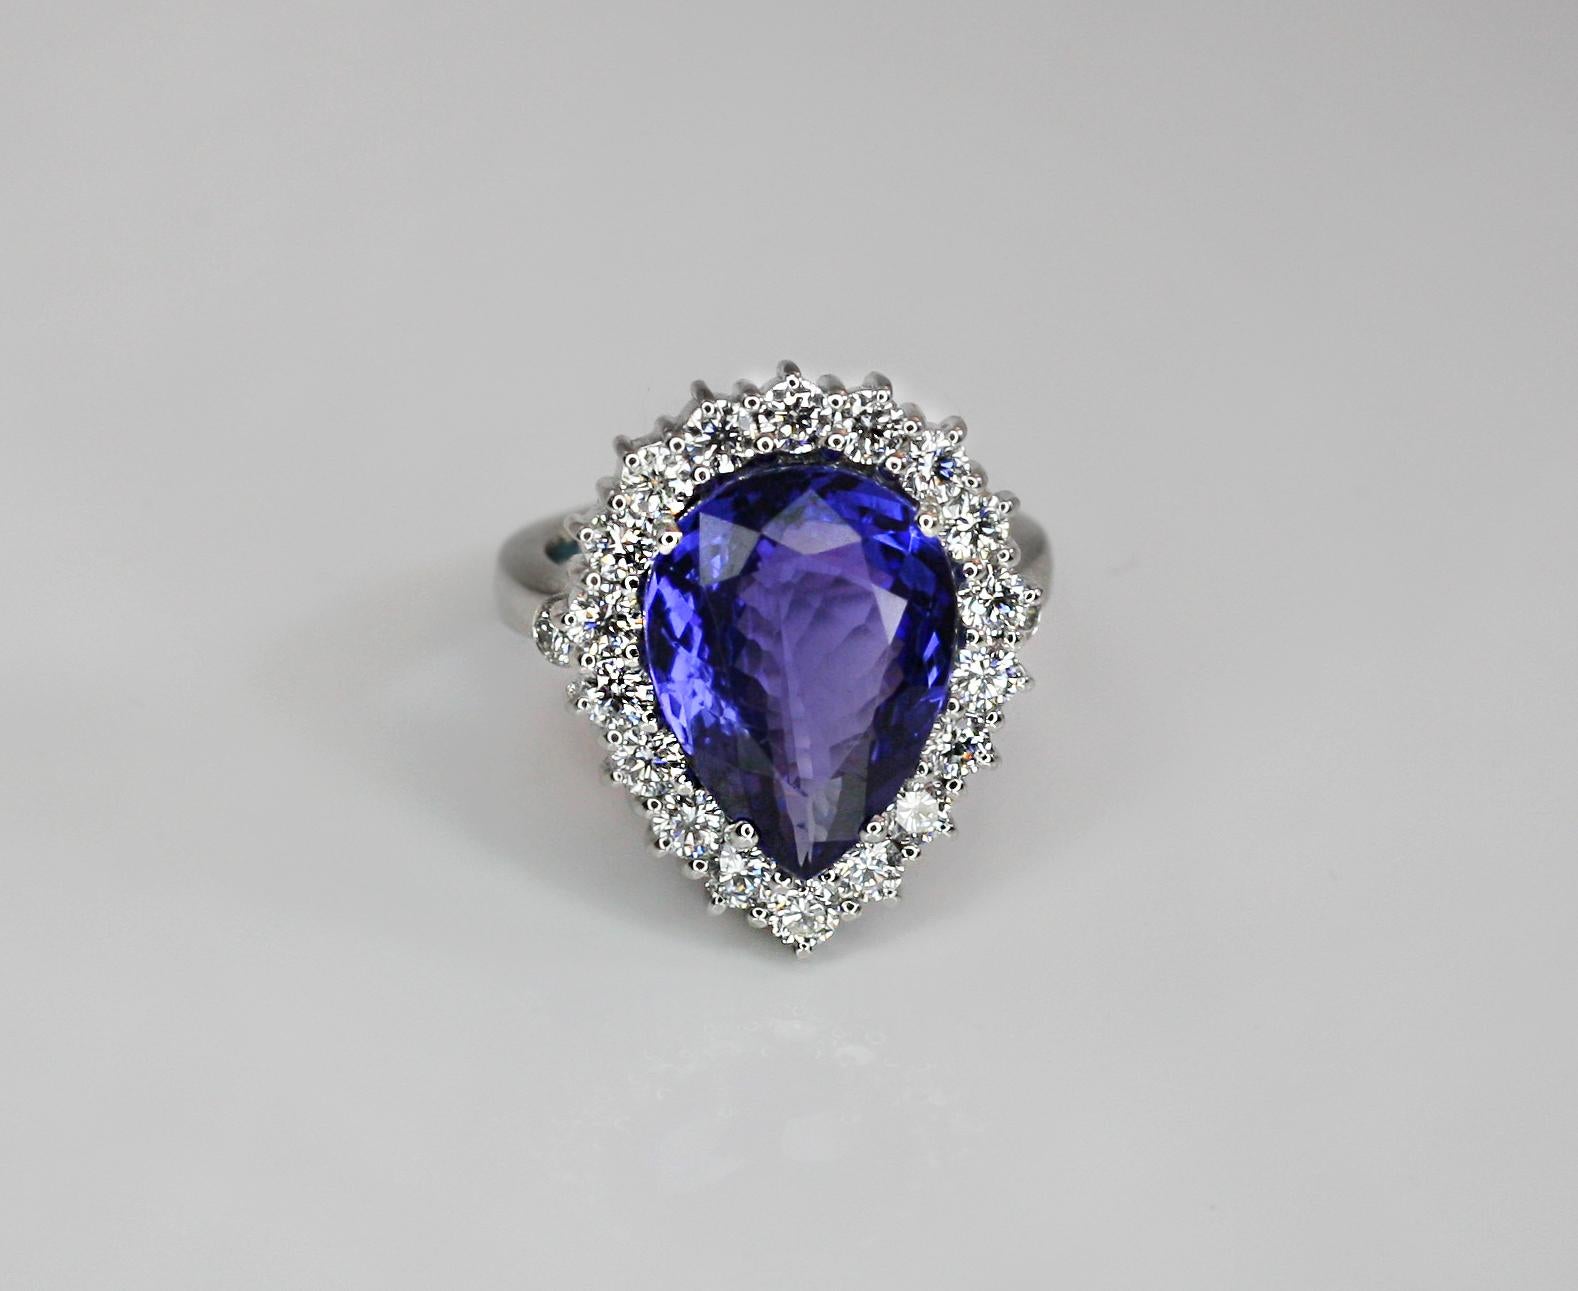 S.Georgios designer Ring is all hand-made in 18 Karat White Gold and features a stunning color, pear cut natural Tanzanite total weight 8.40 Carat surrounded by natural VVS2 color F white brilliant-cut Diamonds total weight of 1.49 Carat. This is a